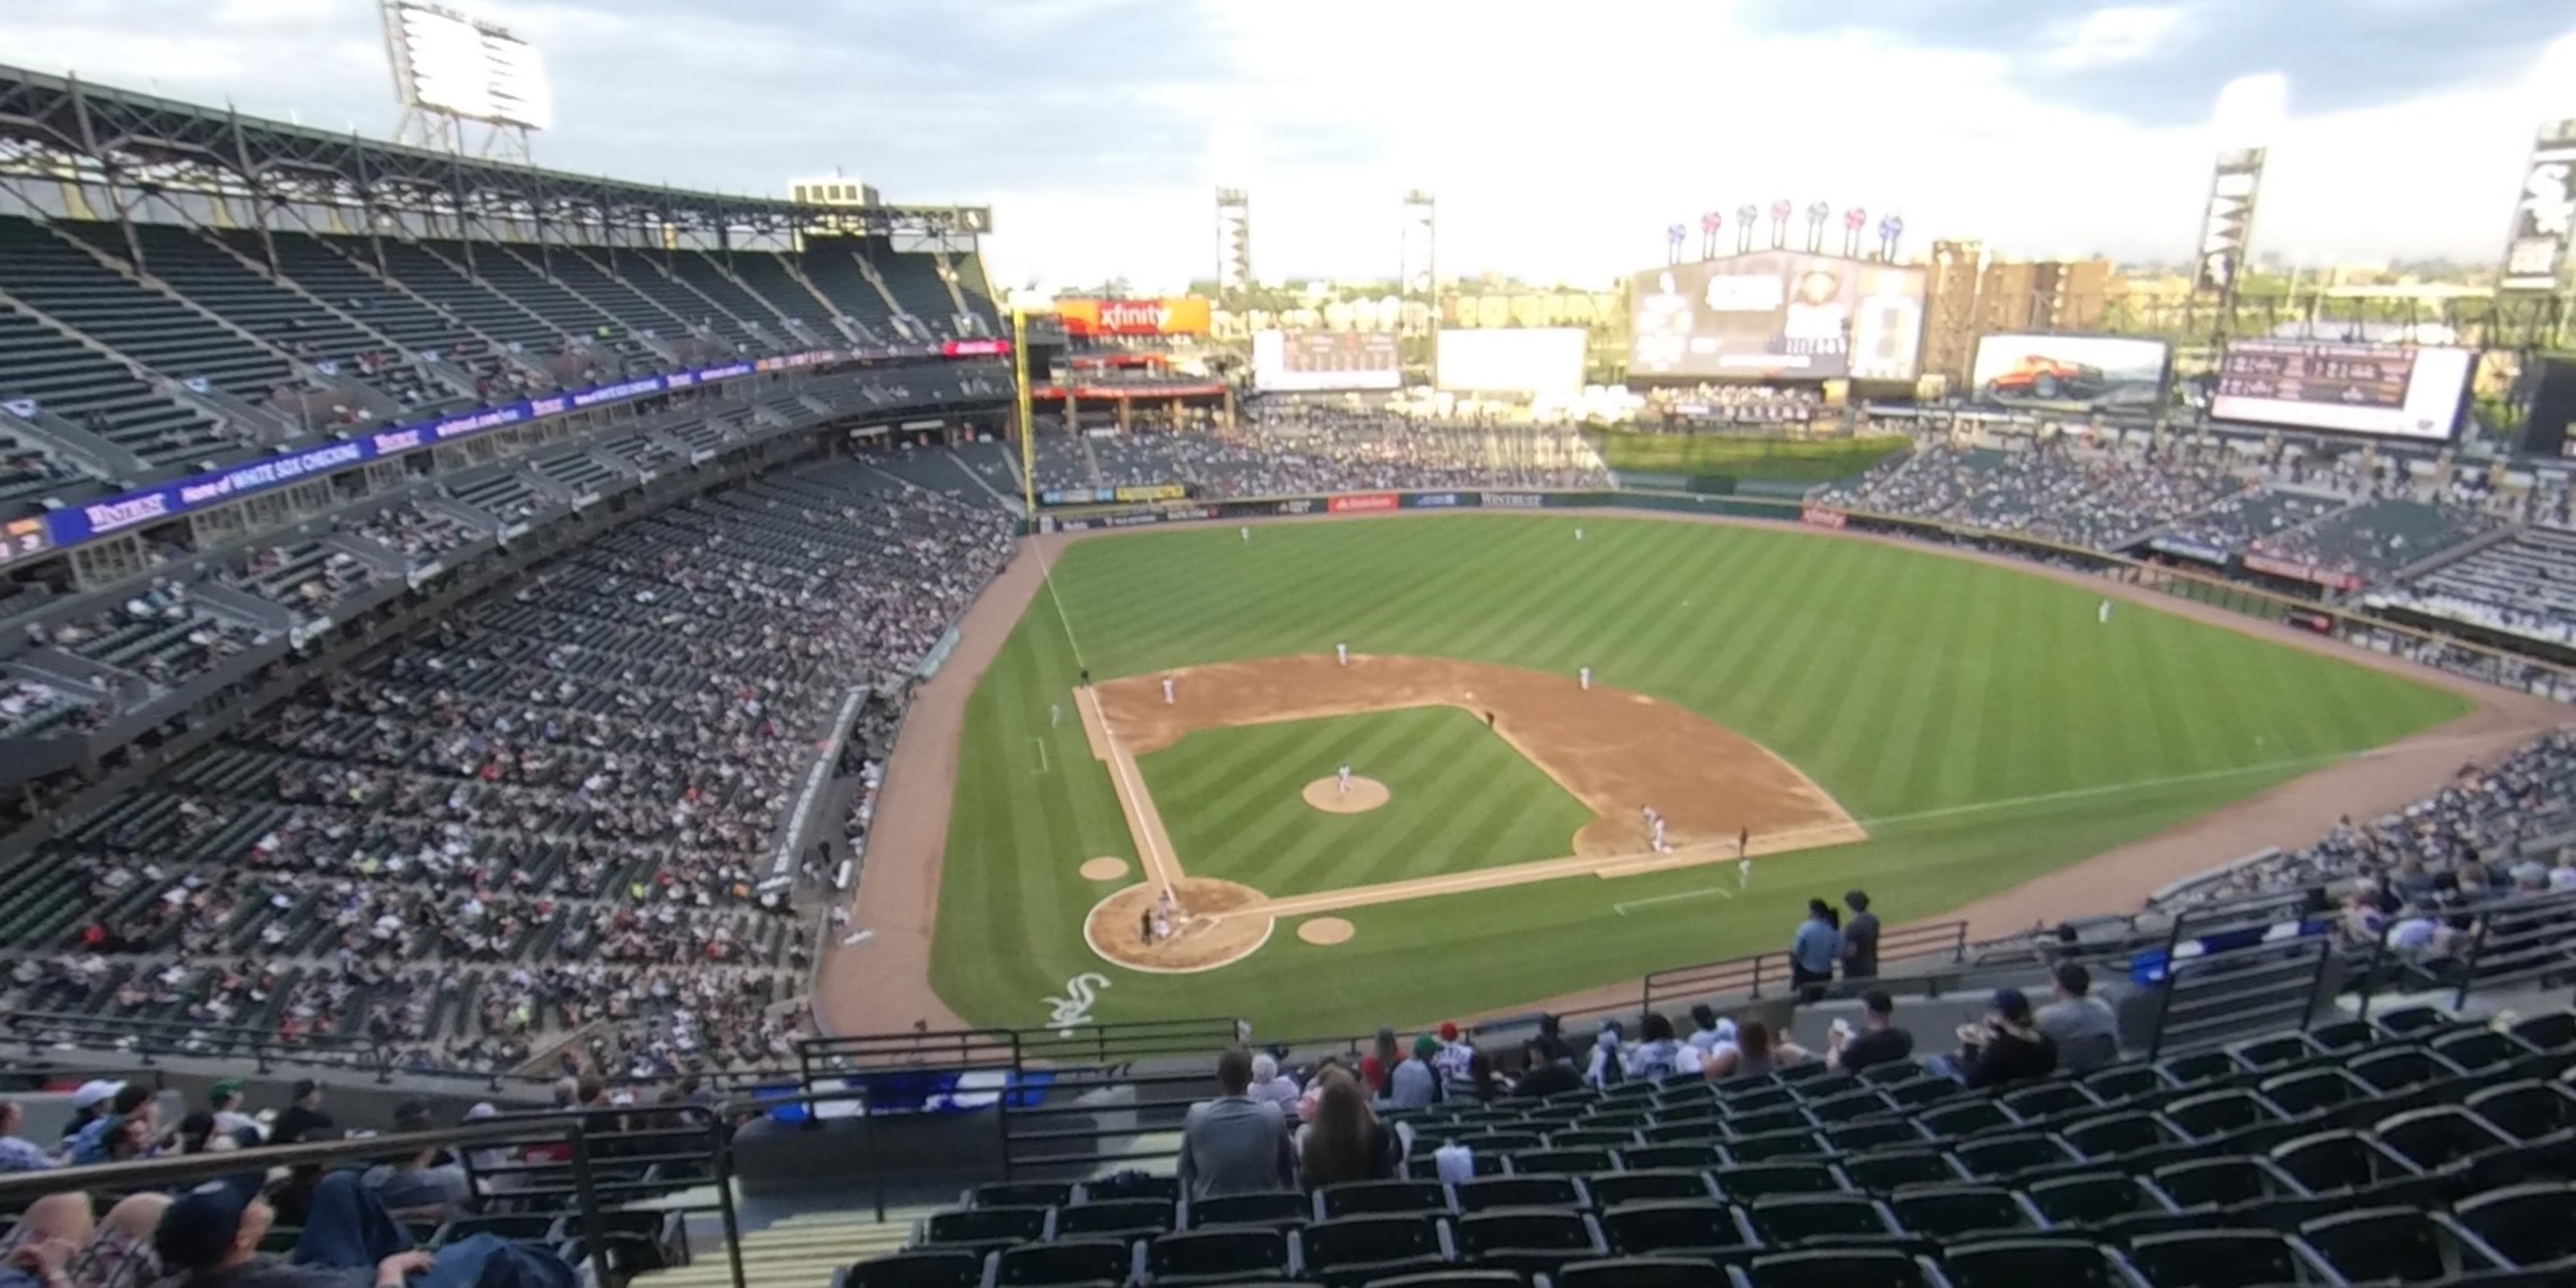 section 528 panoramic seat view  - guaranteed rate field